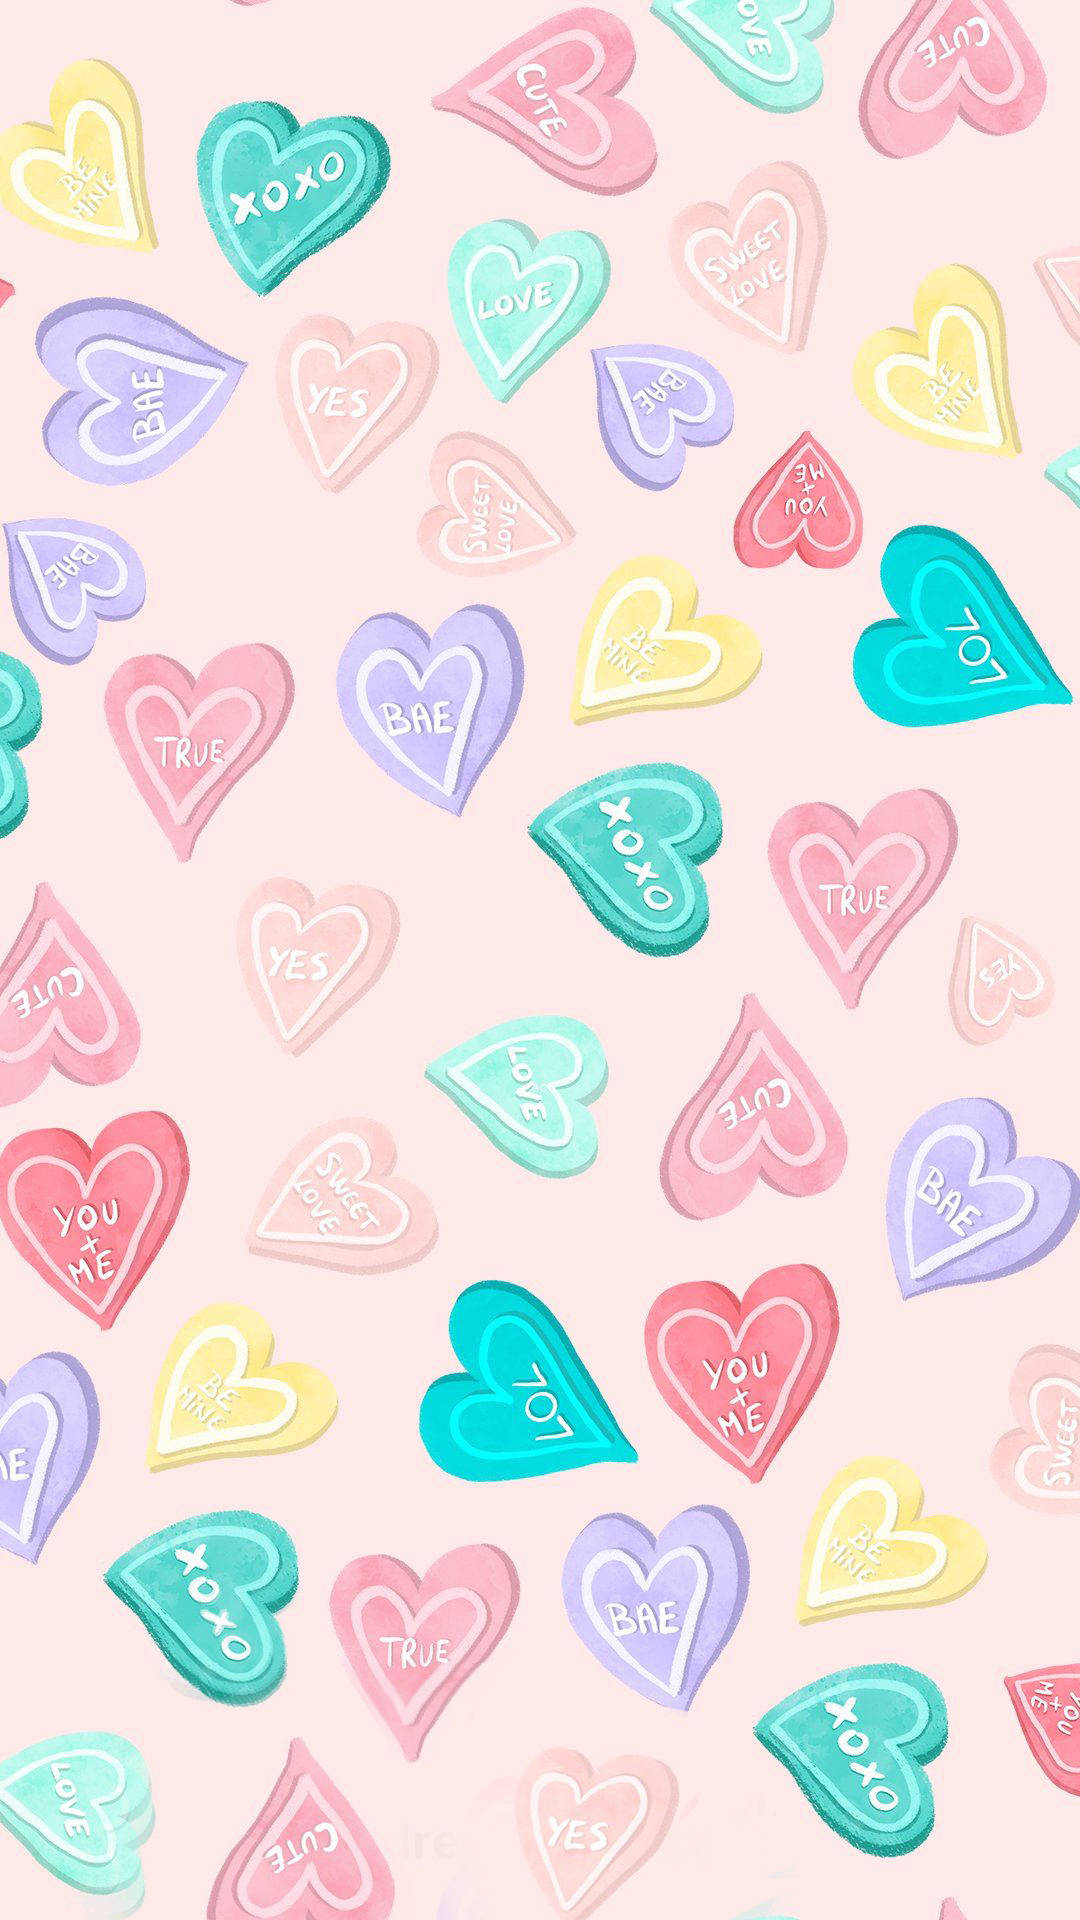 Instagram Story Colorful Love Valentines Heart Wallpaper